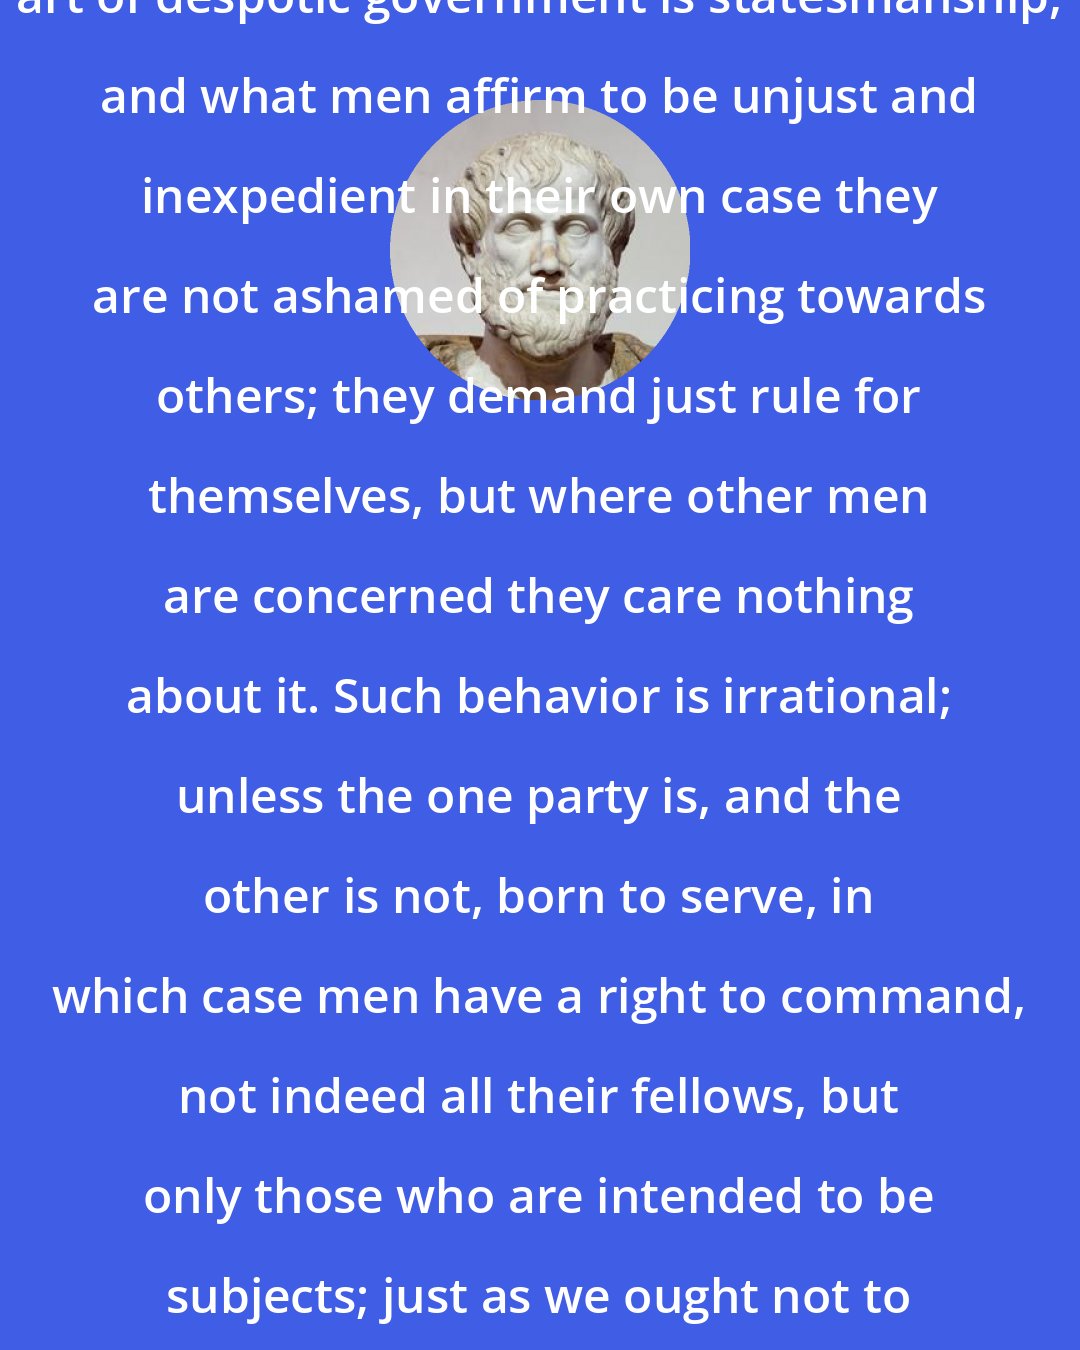 Aristotle: Most men appear to think that the art of despotic government is statesmanship, and what men affirm to be unjust and inexpedient in their own case they are not ashamed of practicing towards others; they demand just rule for themselves, but where other men are concerned they care nothing about it. Such behavior is irrational; unless the one party is, and the other is not, born to serve, in which case men have a right to command, not indeed all their fellows, but only those who are intended to be subjects; just as we ought not to hunt mankind, whether for food or sacrifice . .